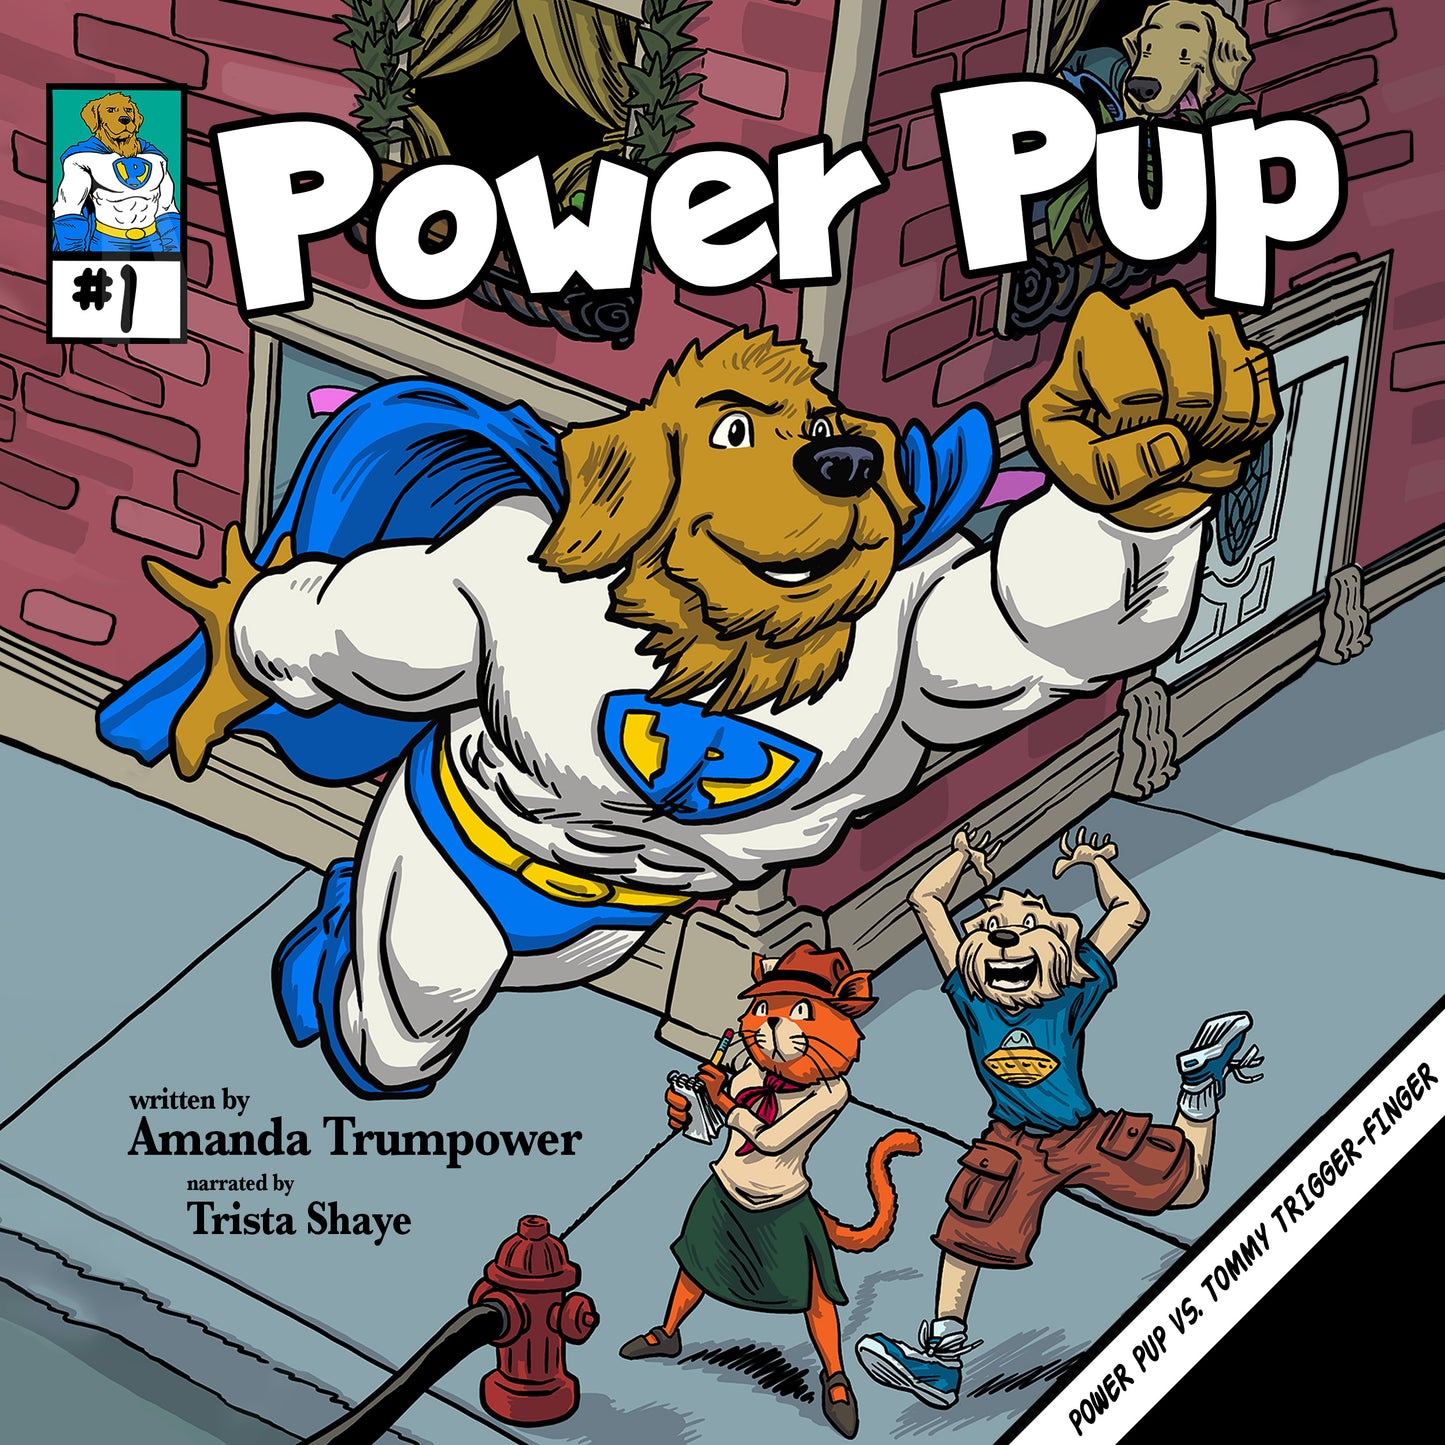 Power Pup #1: Power Pup vs. Tommy Trigger Finger